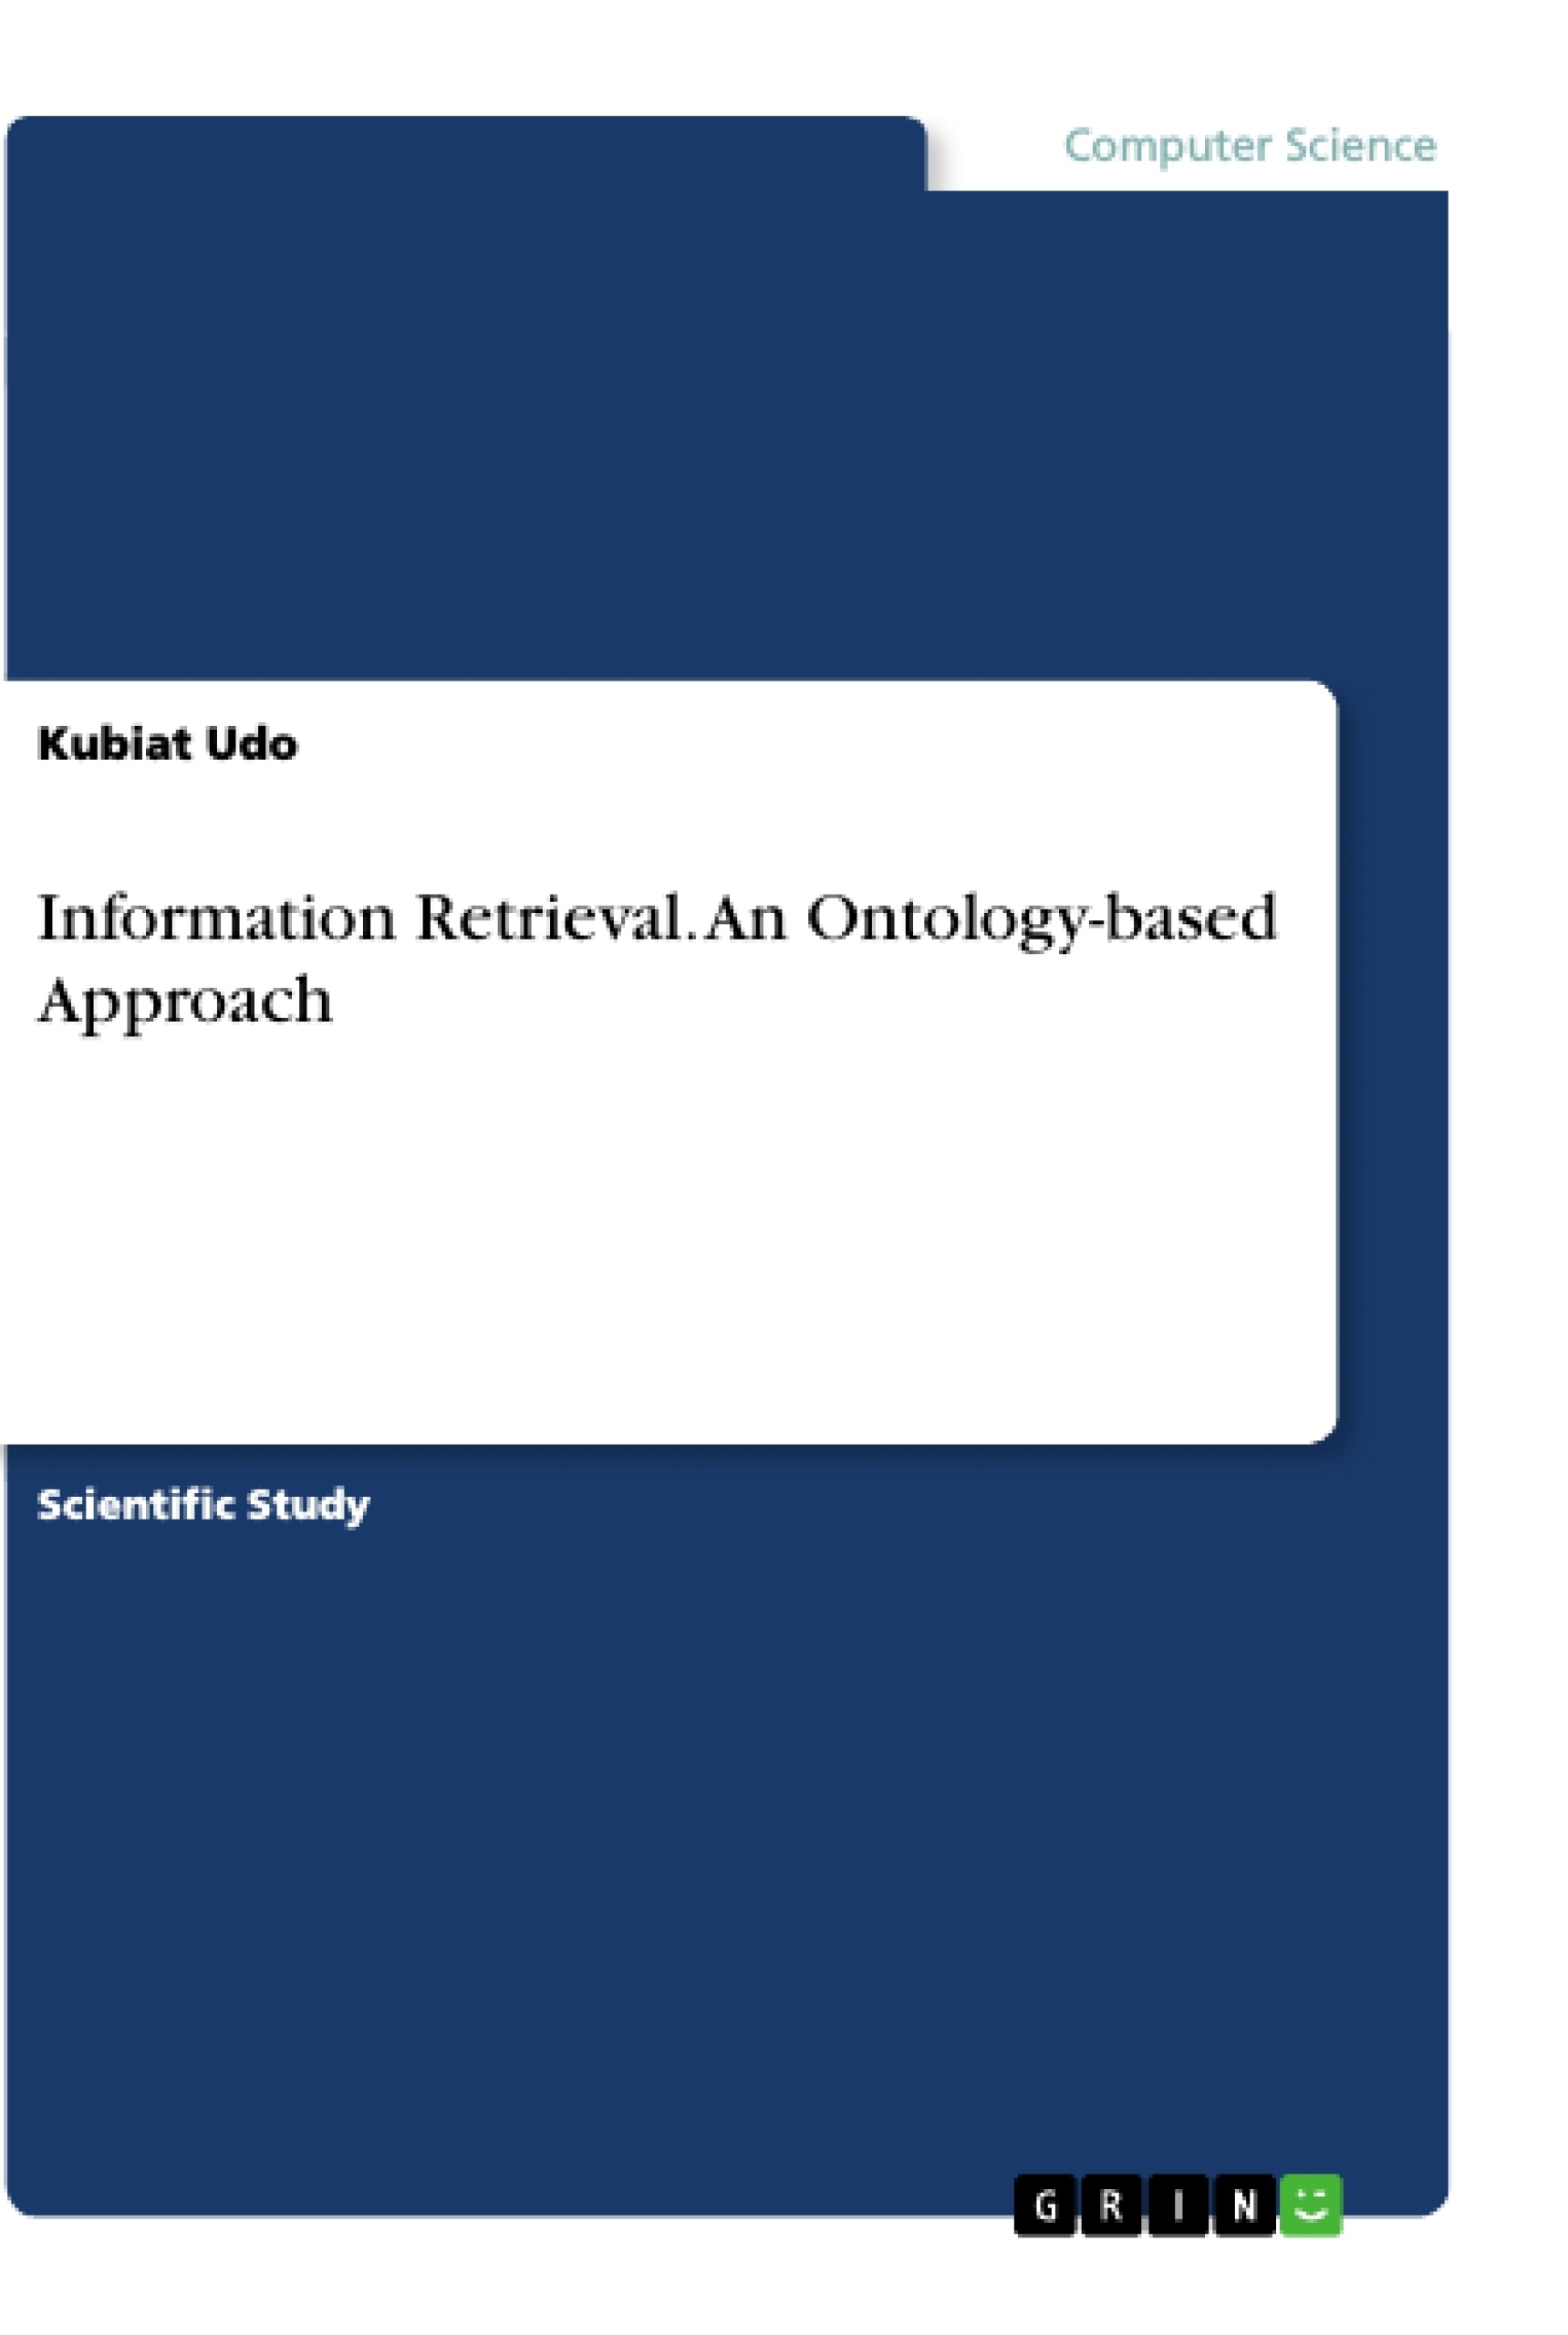 Titre: Information Retrieval. An Ontology-based Approach